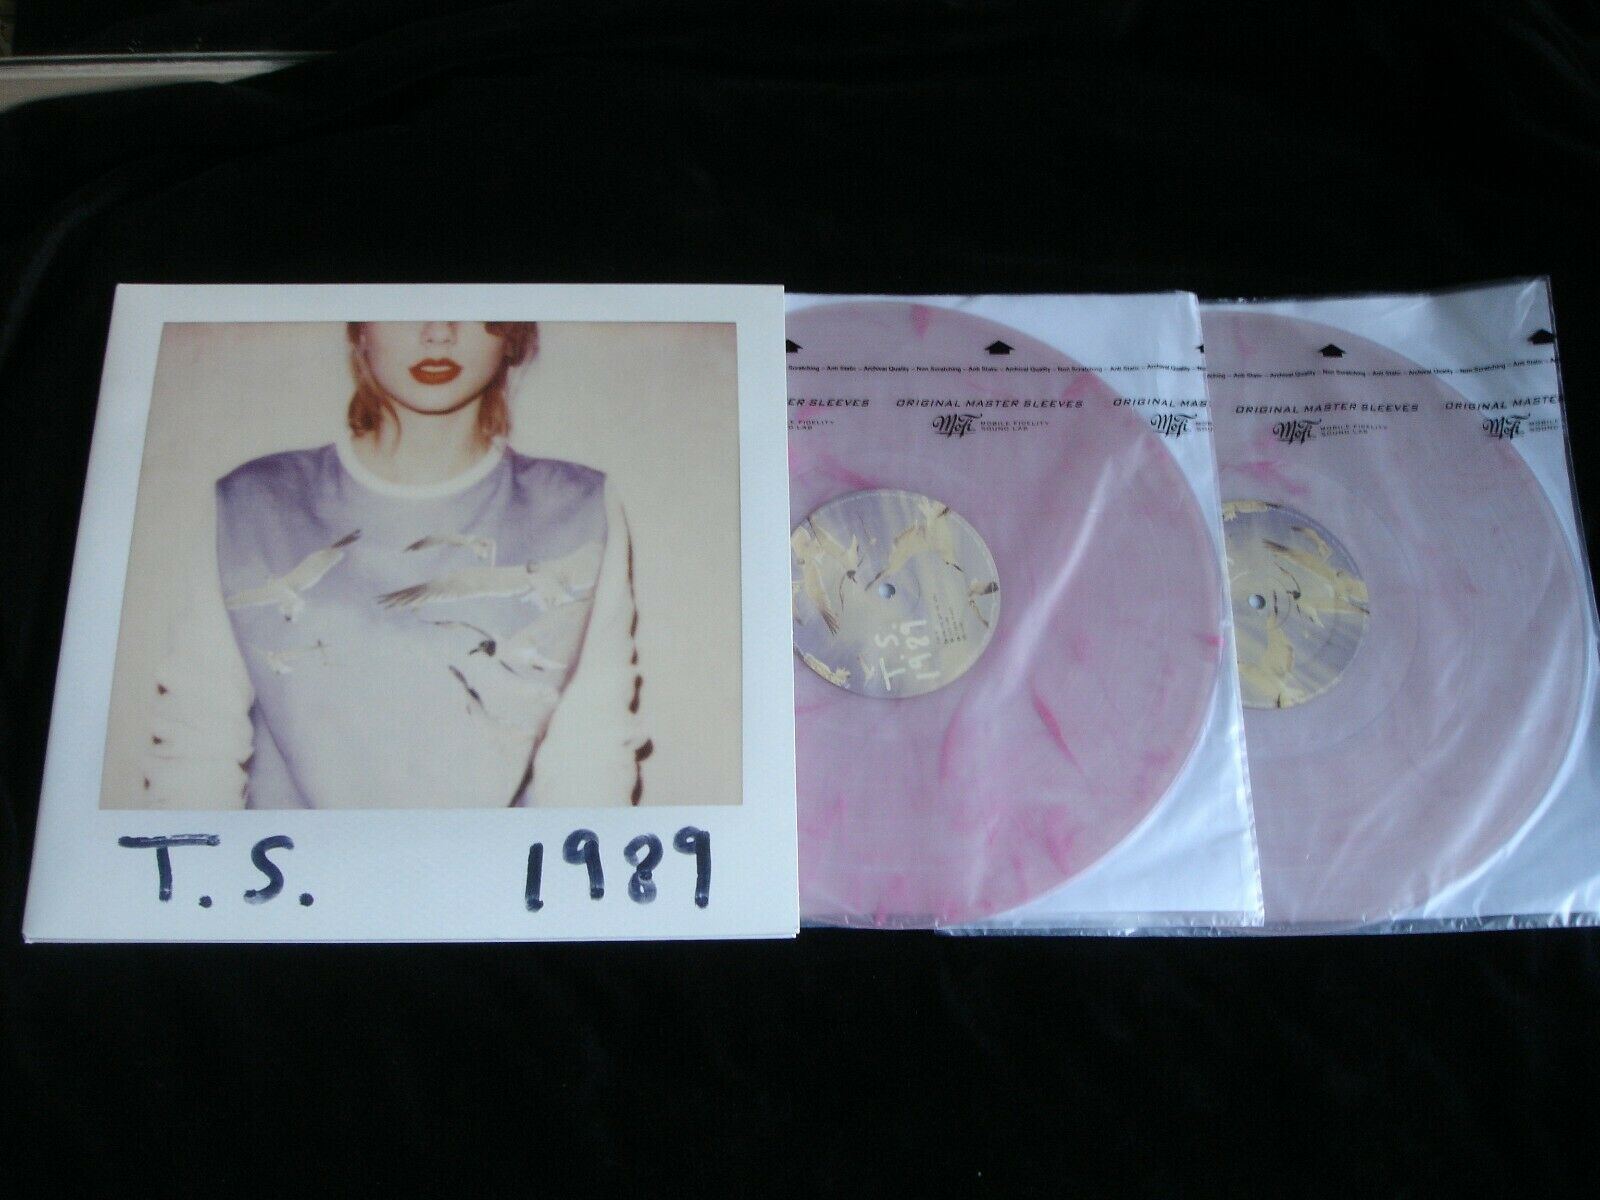 taylor-swift-t-s-1989-rsd-exclusive-599-3-750-crystal-clear-pink-vinyl-2lp